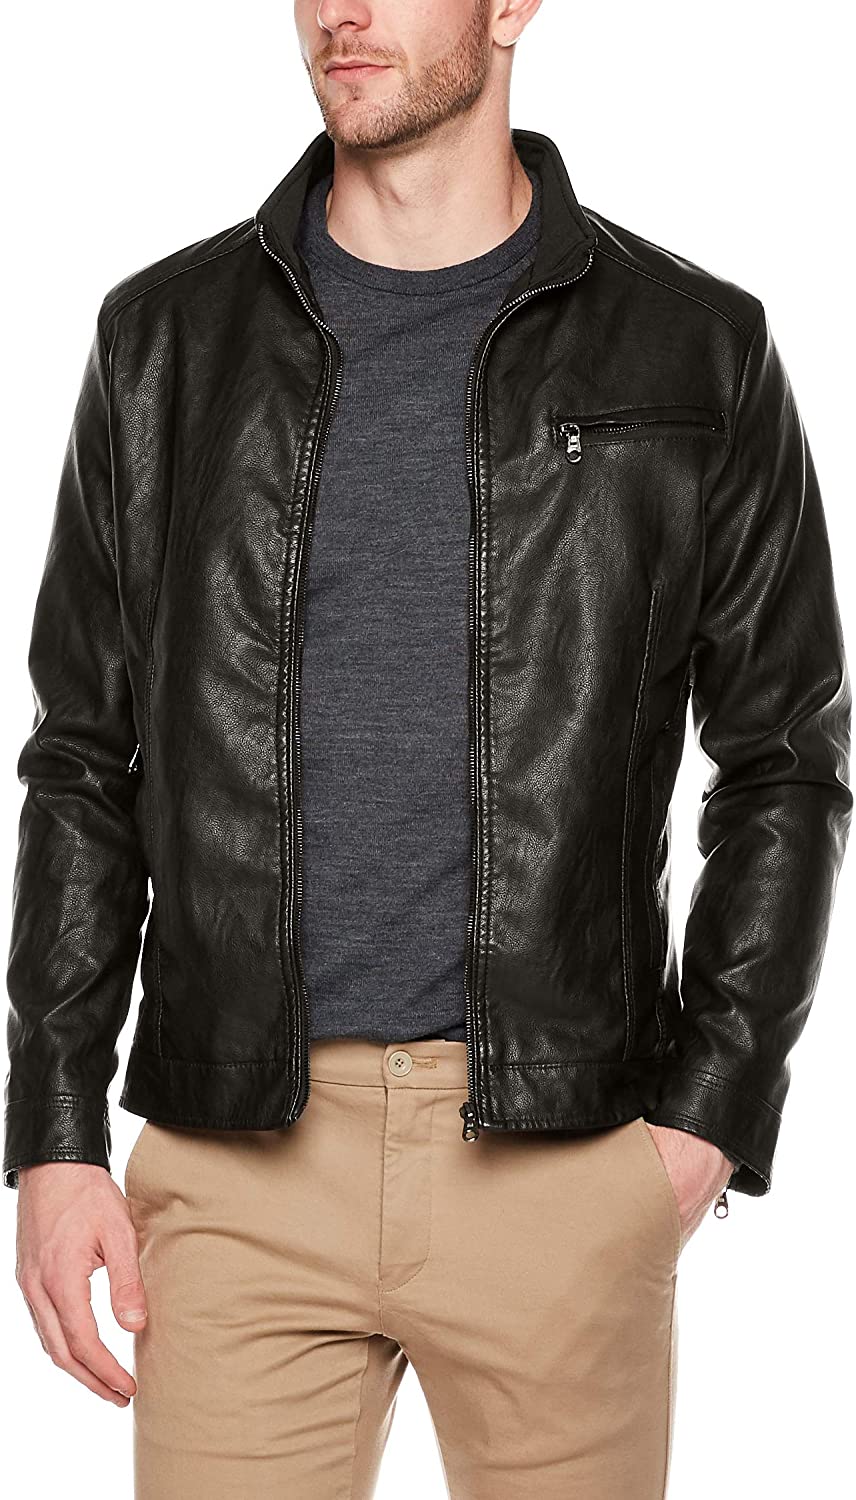 Black Color Genuine Sheep Leather Jacket In Slim Fit Classic Style For Men